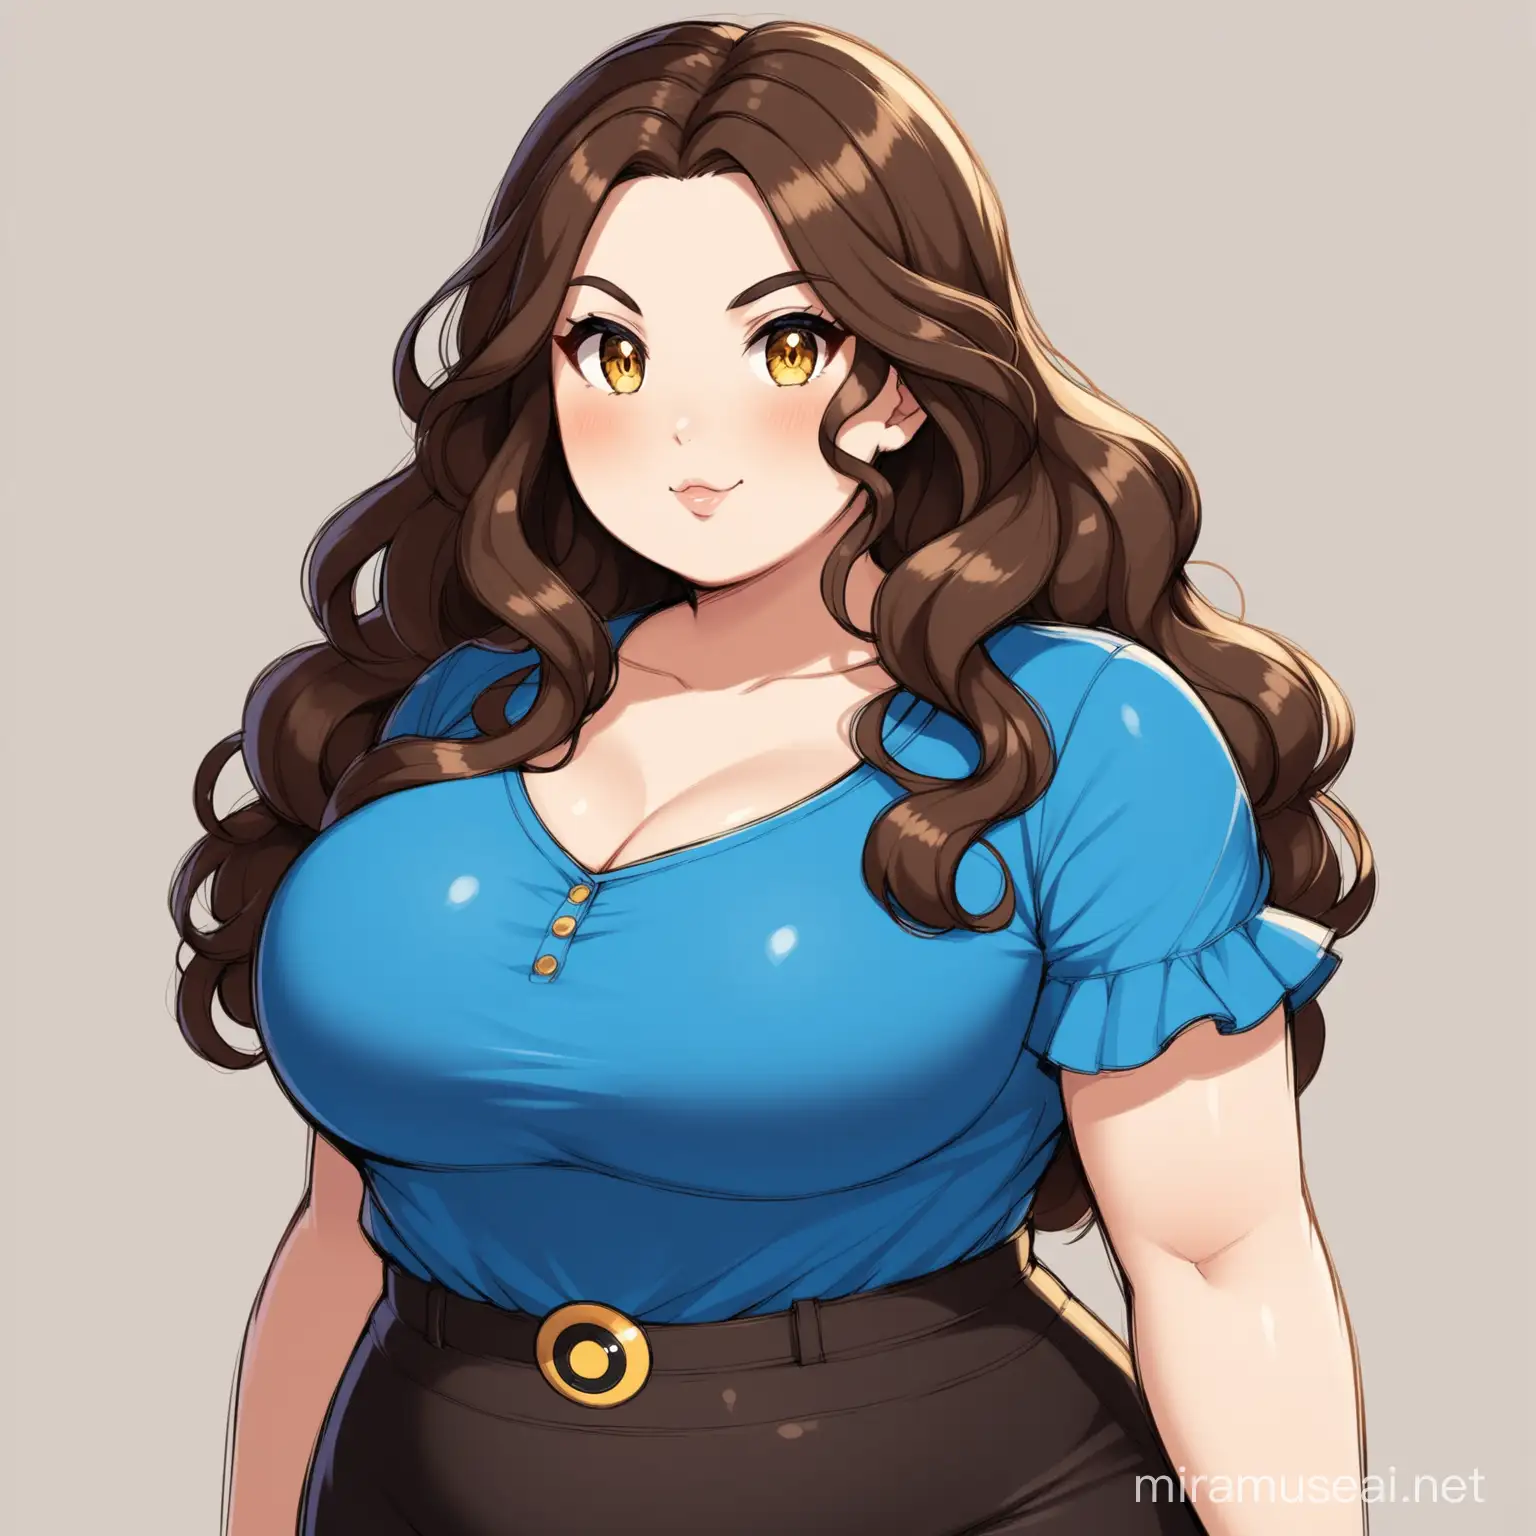 Curvy Woman with Pokemoninspired Styling and Vibrant Blue Blouse